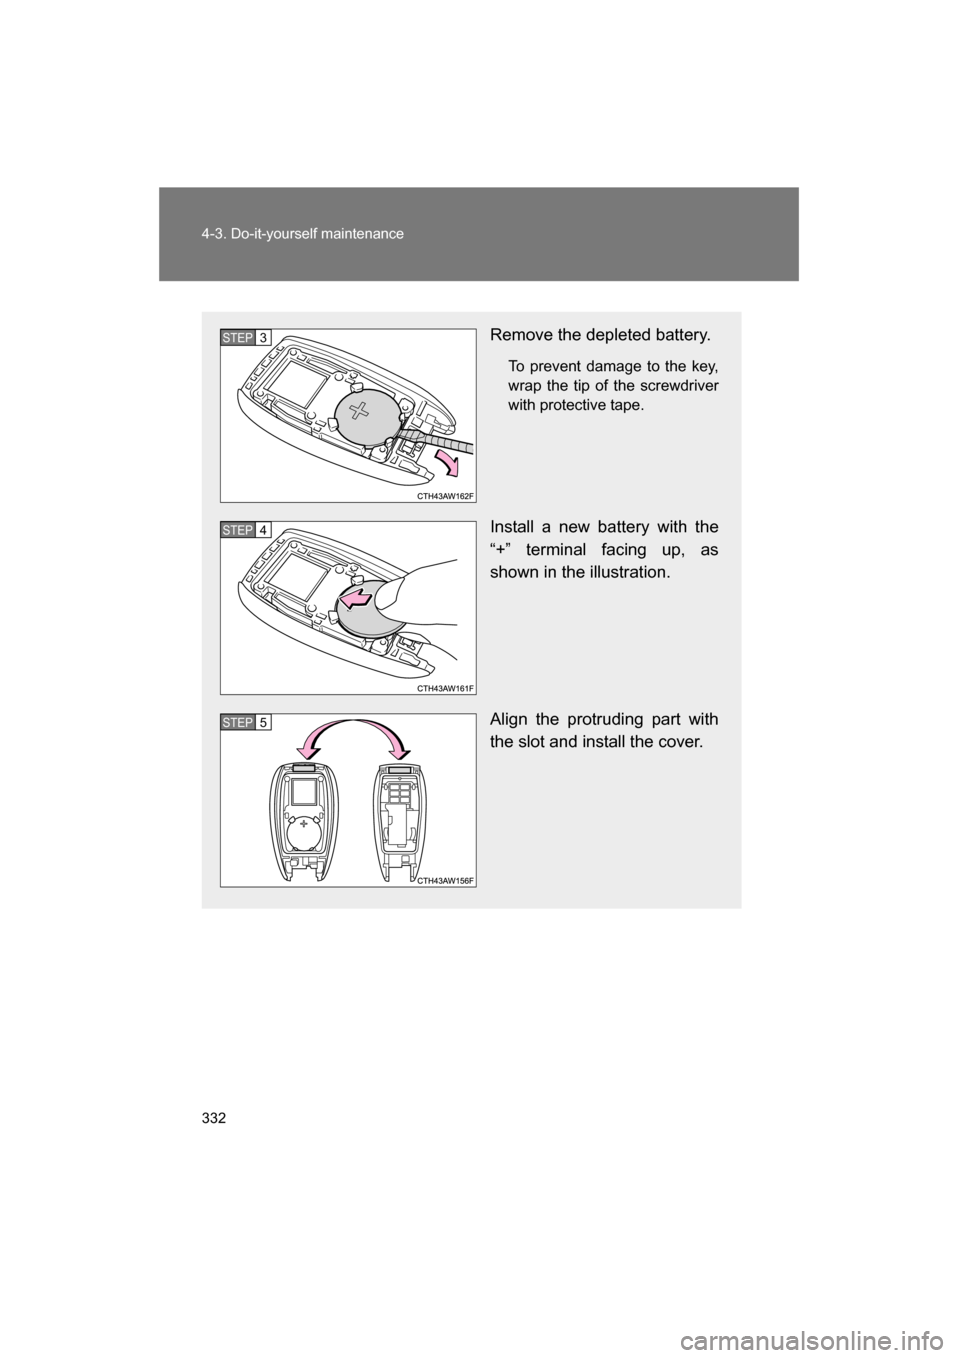 SUBARU BRZ 2015 1.G Owners Guide 332
4-3. Do-it-yourself maintenance
Remove the depleted battery.To prevent damage to the key, 
wrap the tip of the screwdriver
with protective tape.
Install a new battery with the 
“+” terminal fa